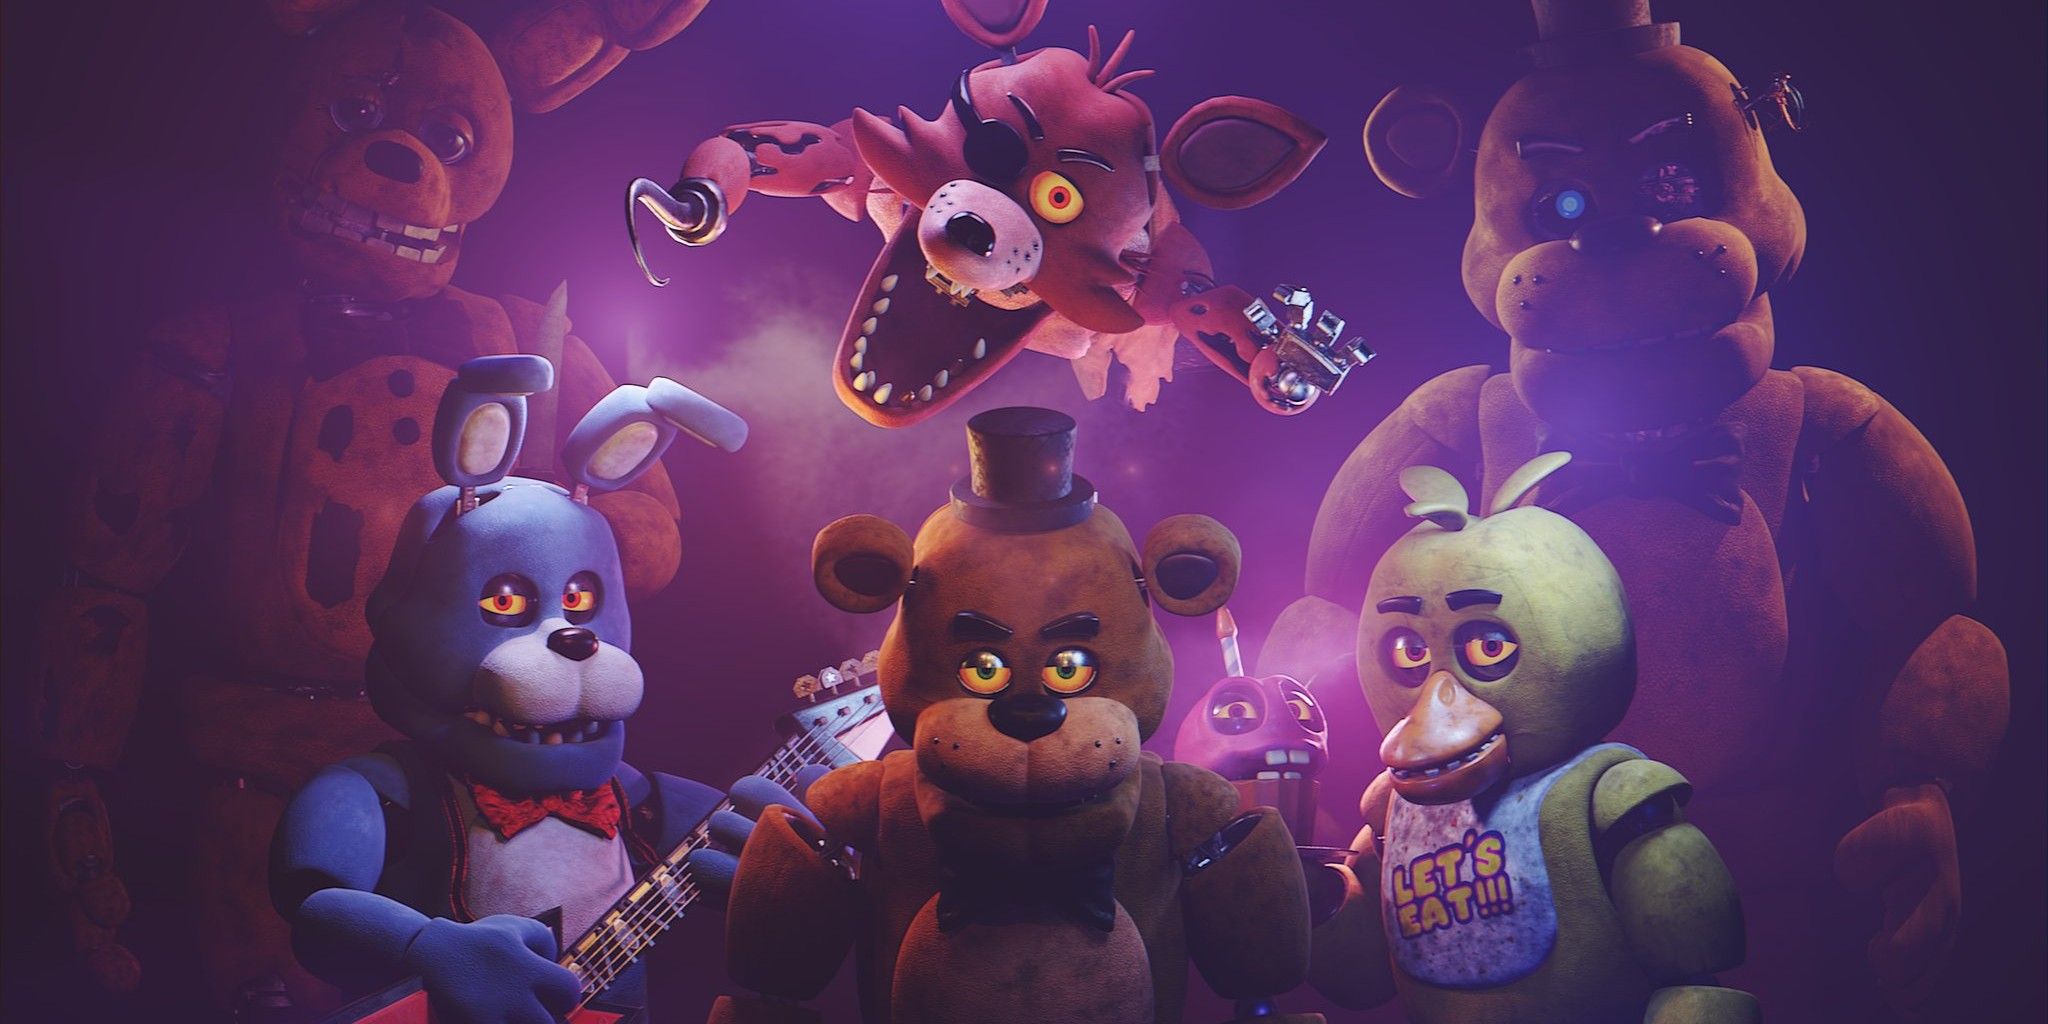 Key art from the Five Nights At Freddy's Movie featuring the animatronics